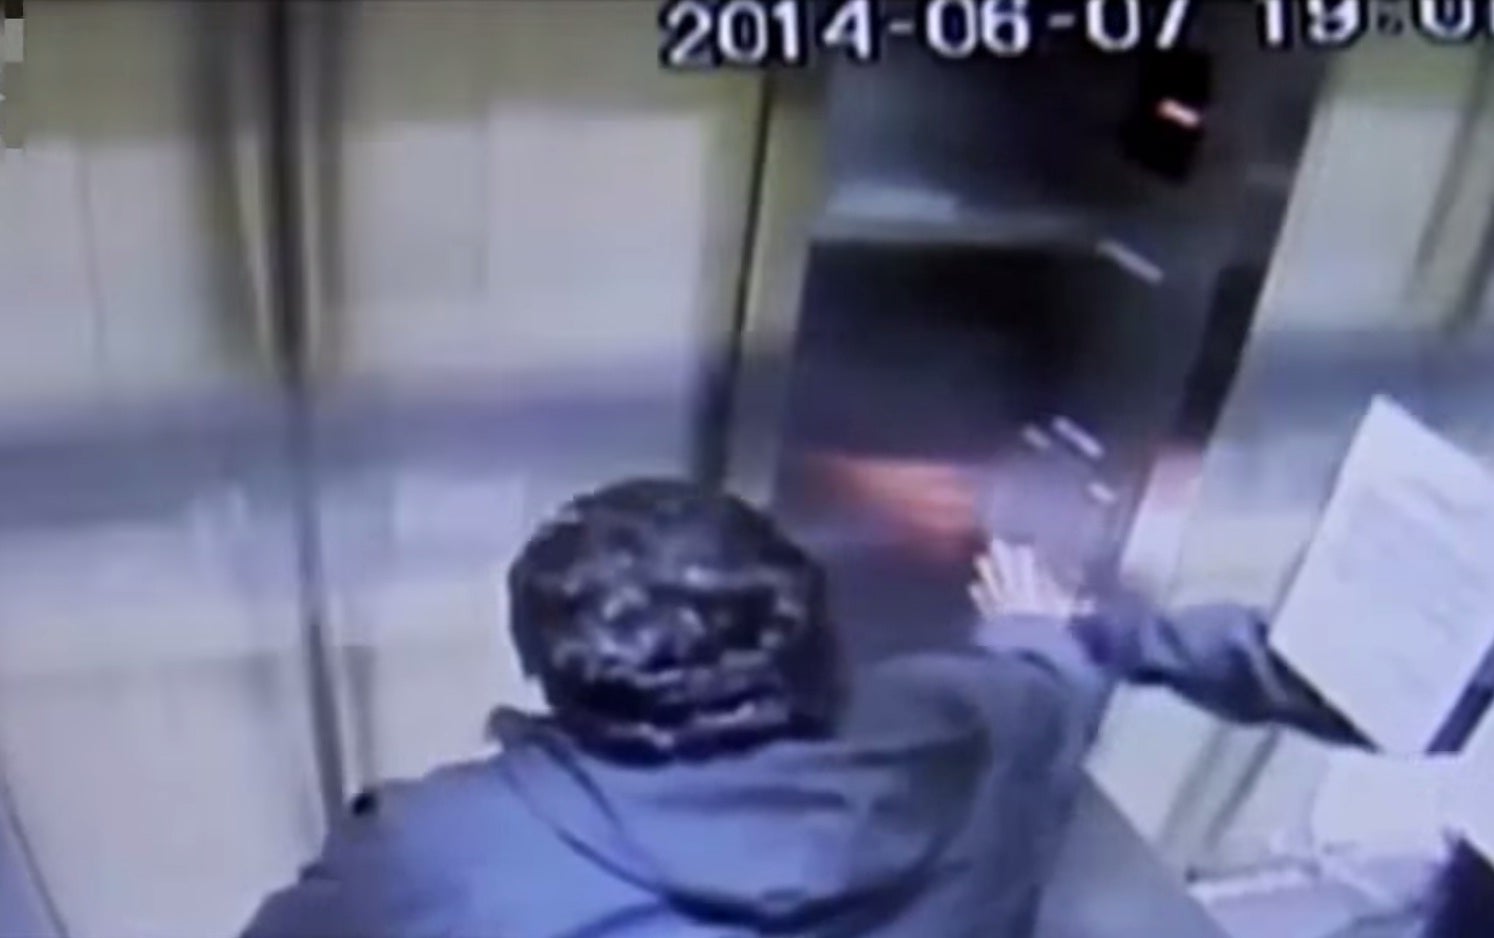 The passenger desperately tried to hit the lift's emergency stop button